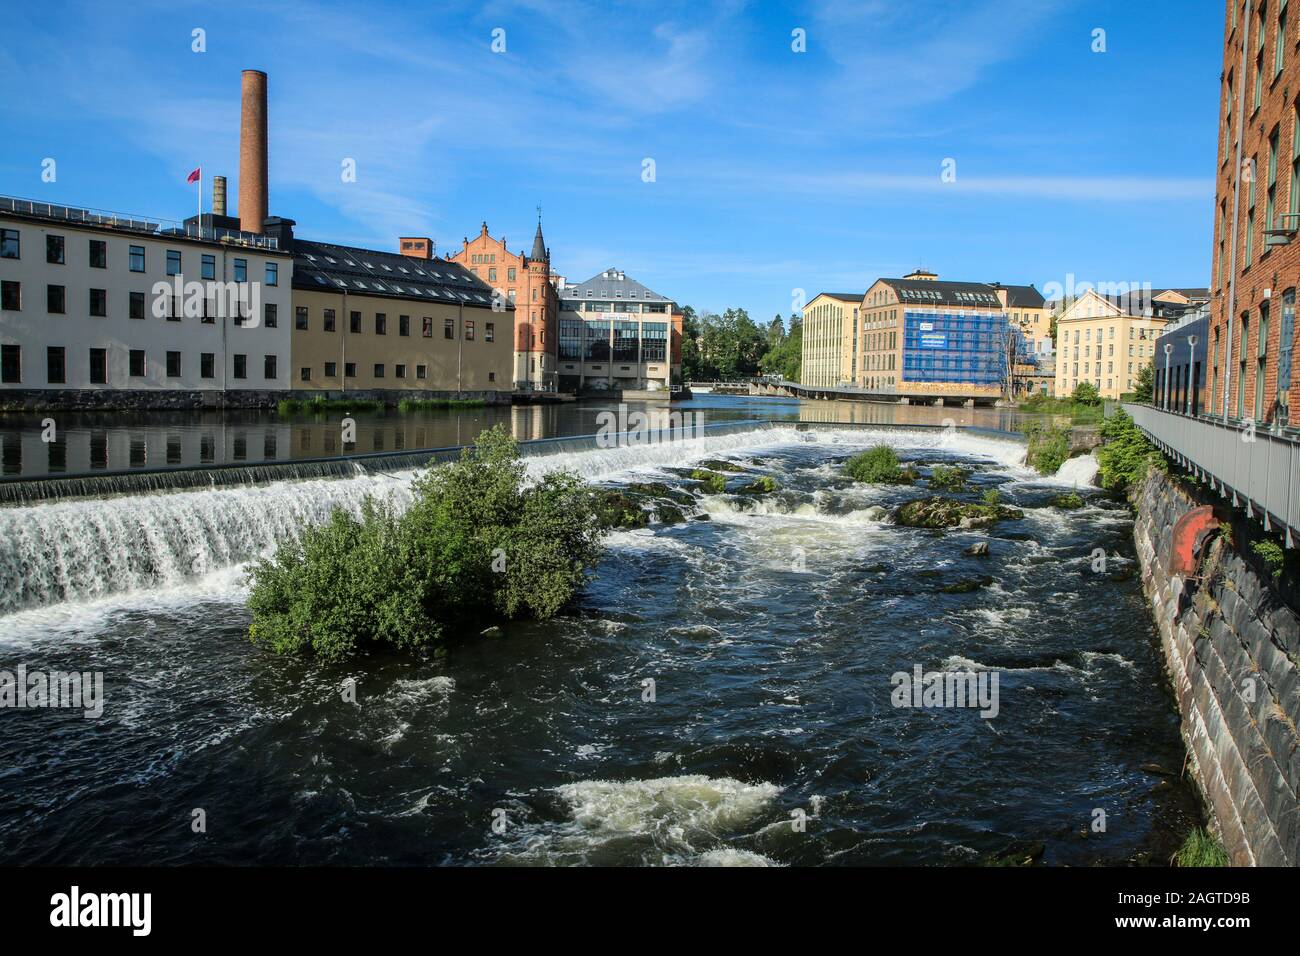 The center of the city of Norrköpping in Sweden with its interesting combination of modern and historic architecture. Stock Photo